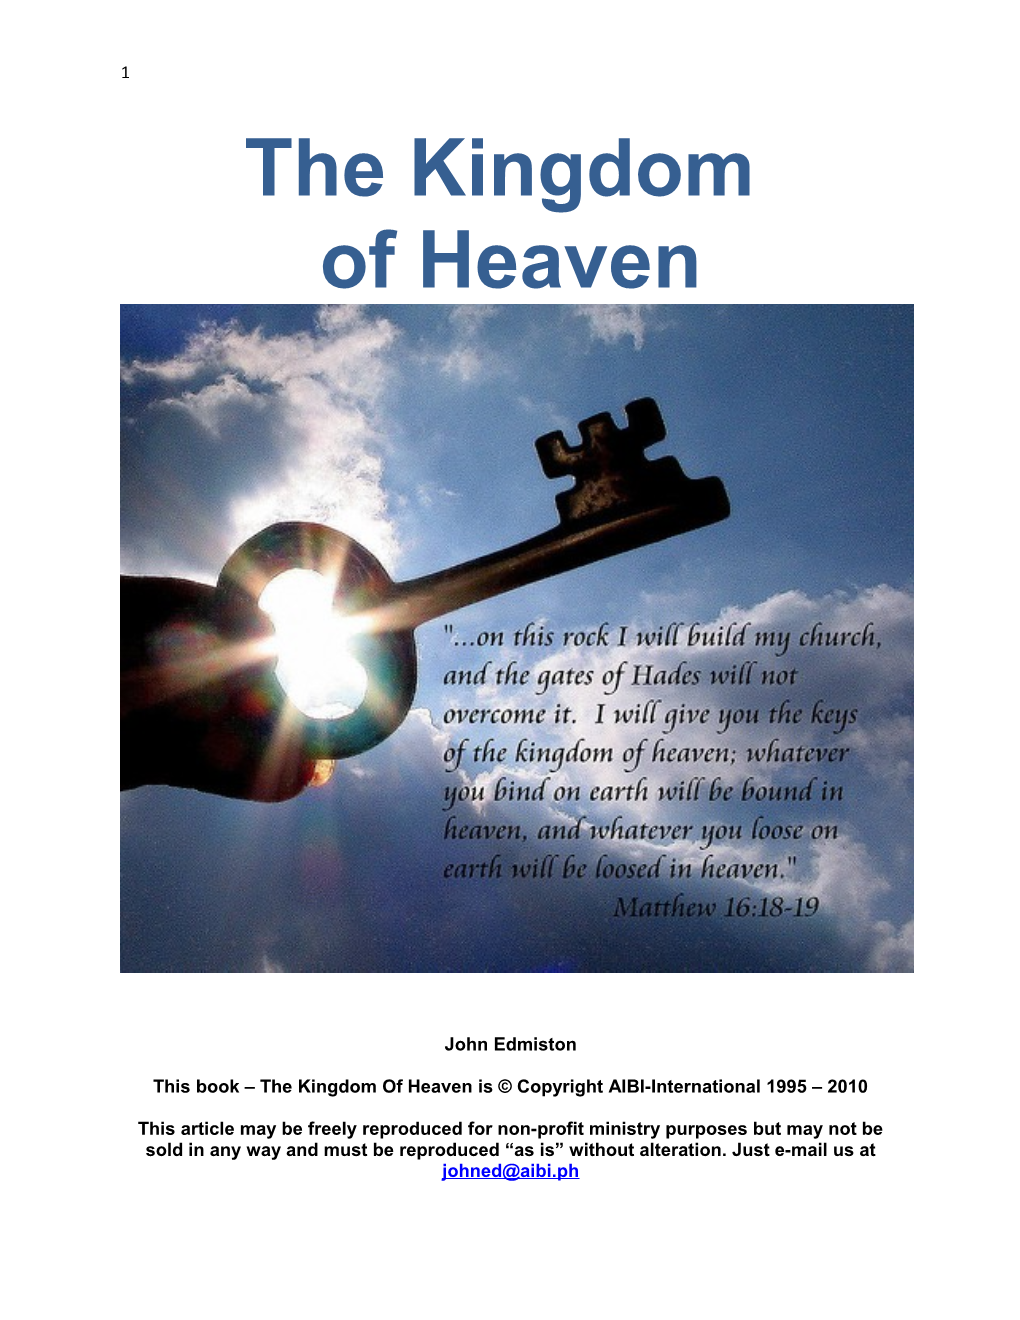 This Book the Kingdom of Heaven Is Copyright AIBI-International 1995 2010